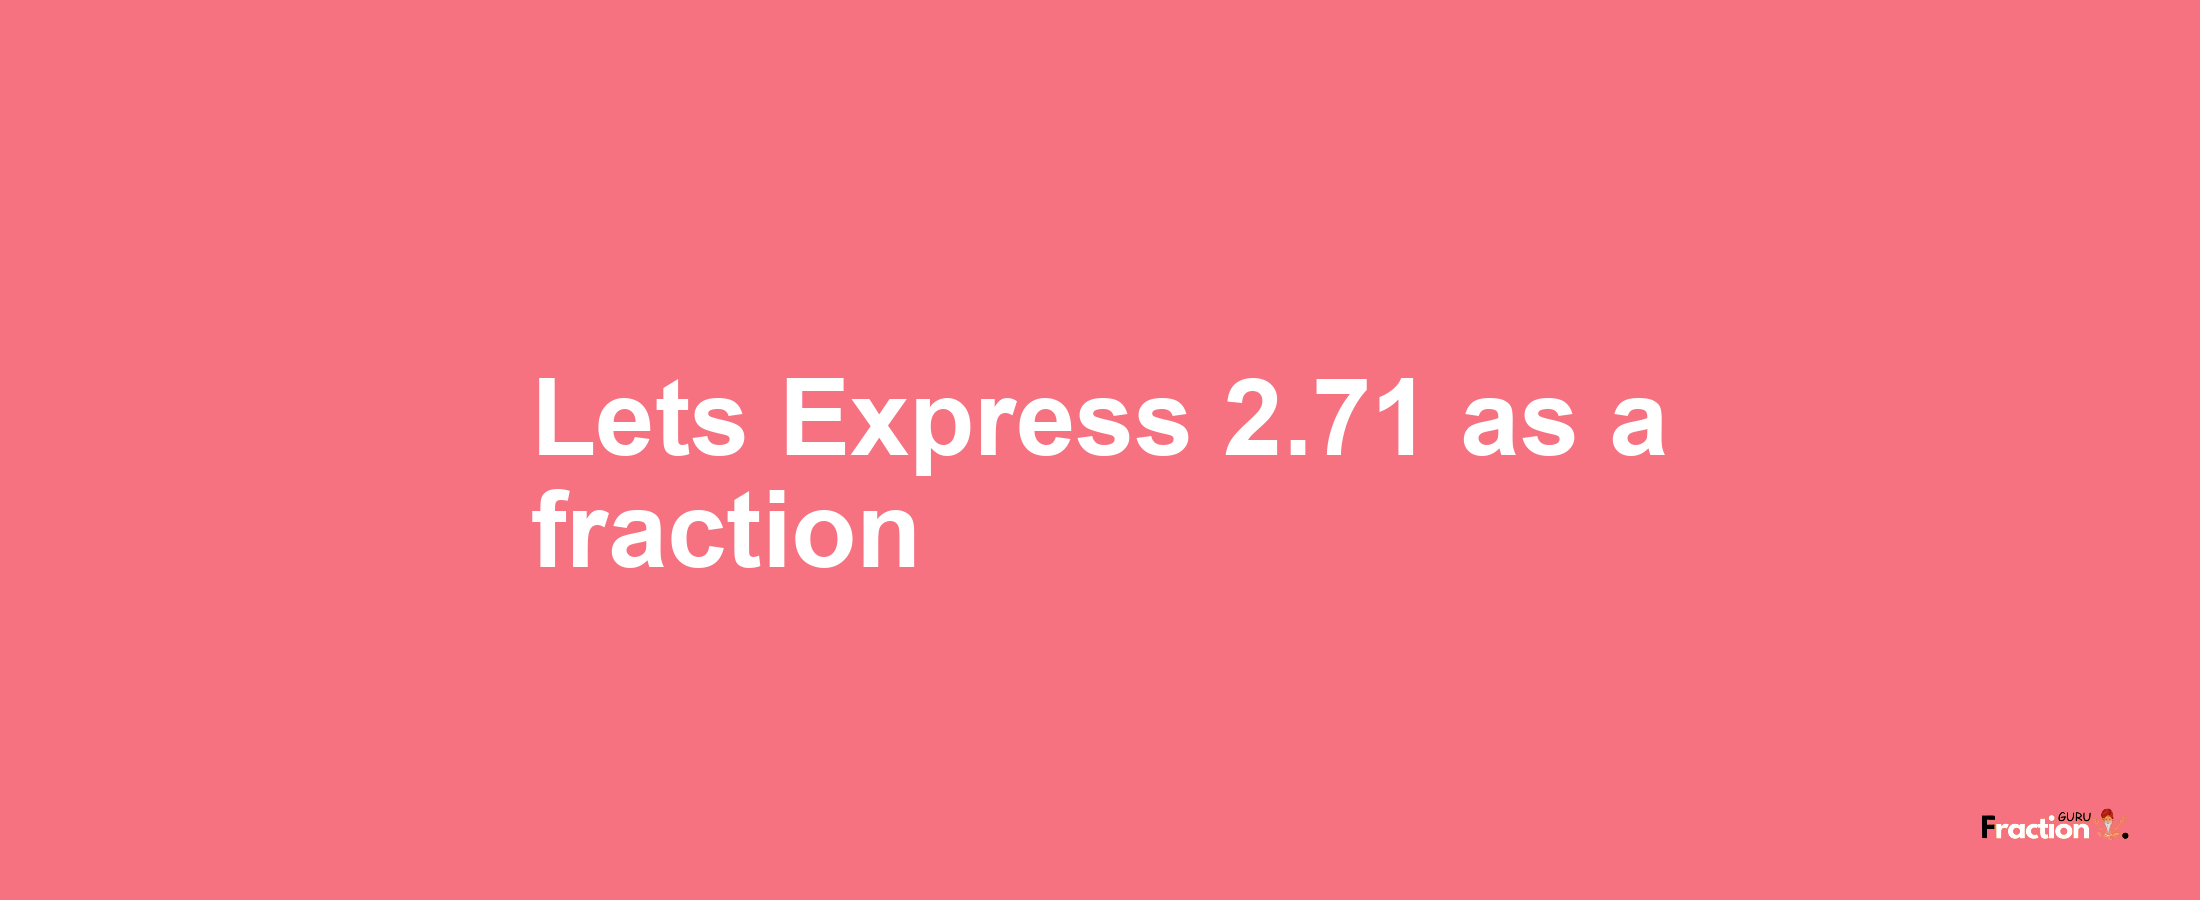 Lets Express 2.71 as afraction